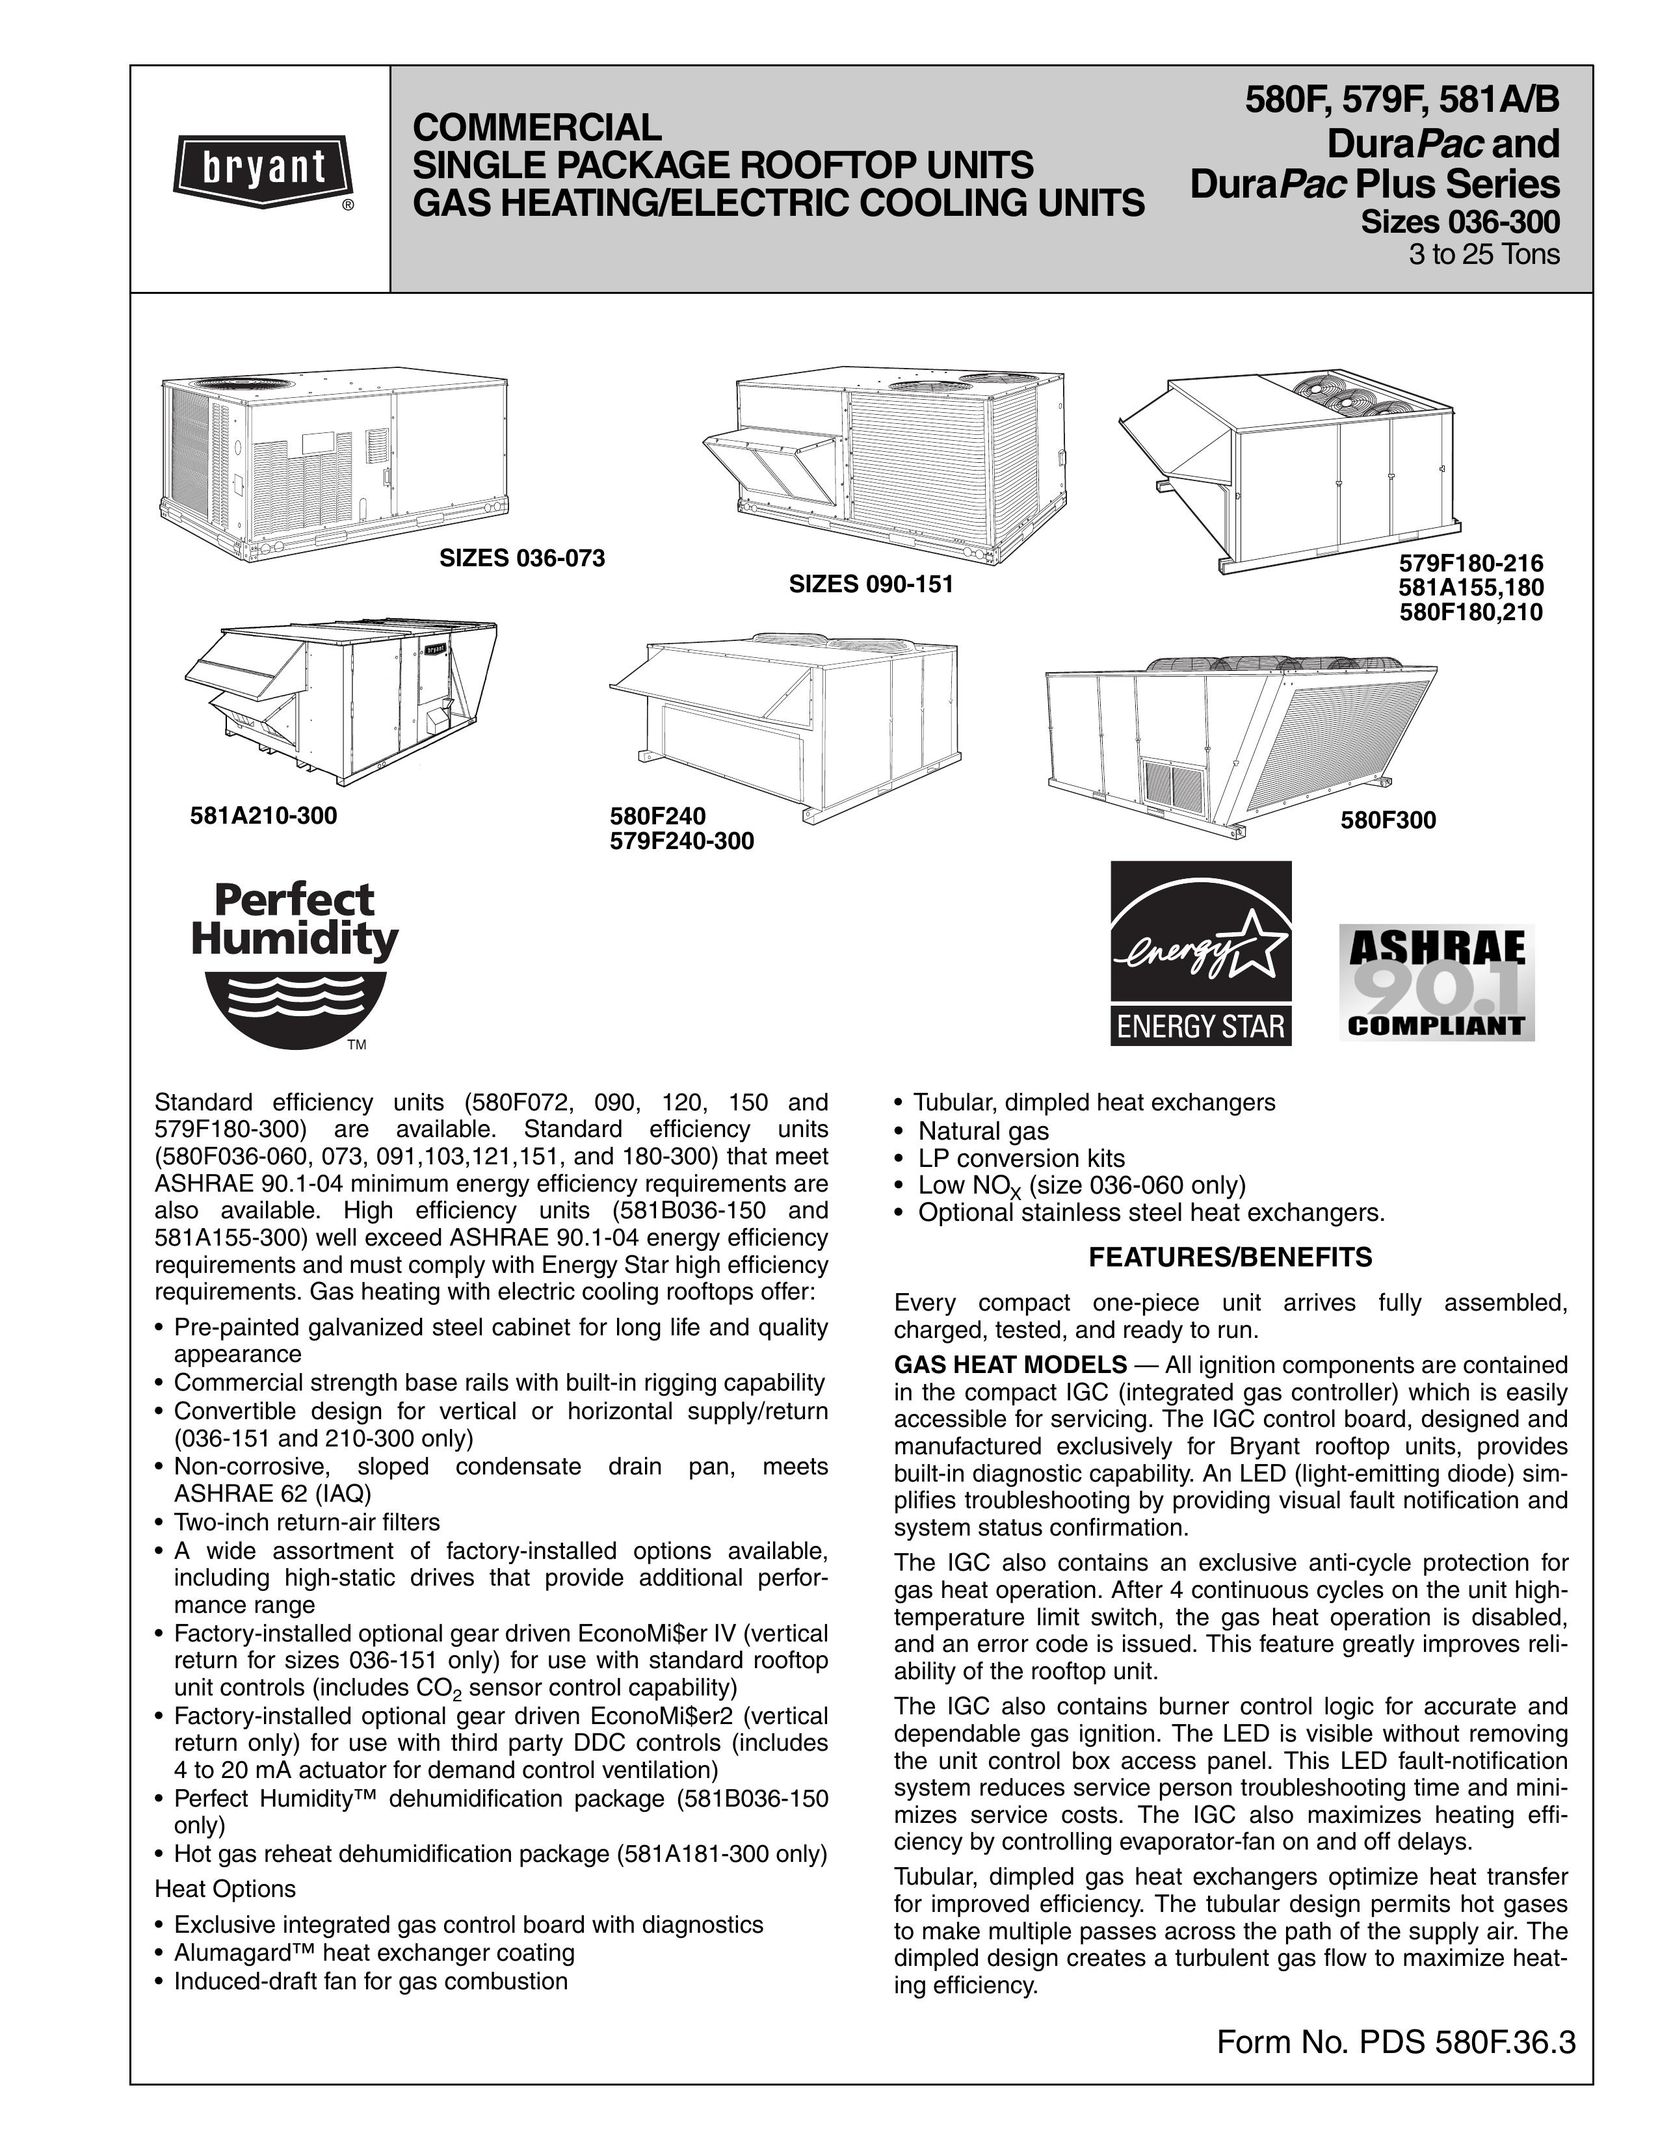 Bryant 581A/B Heating System User Manual